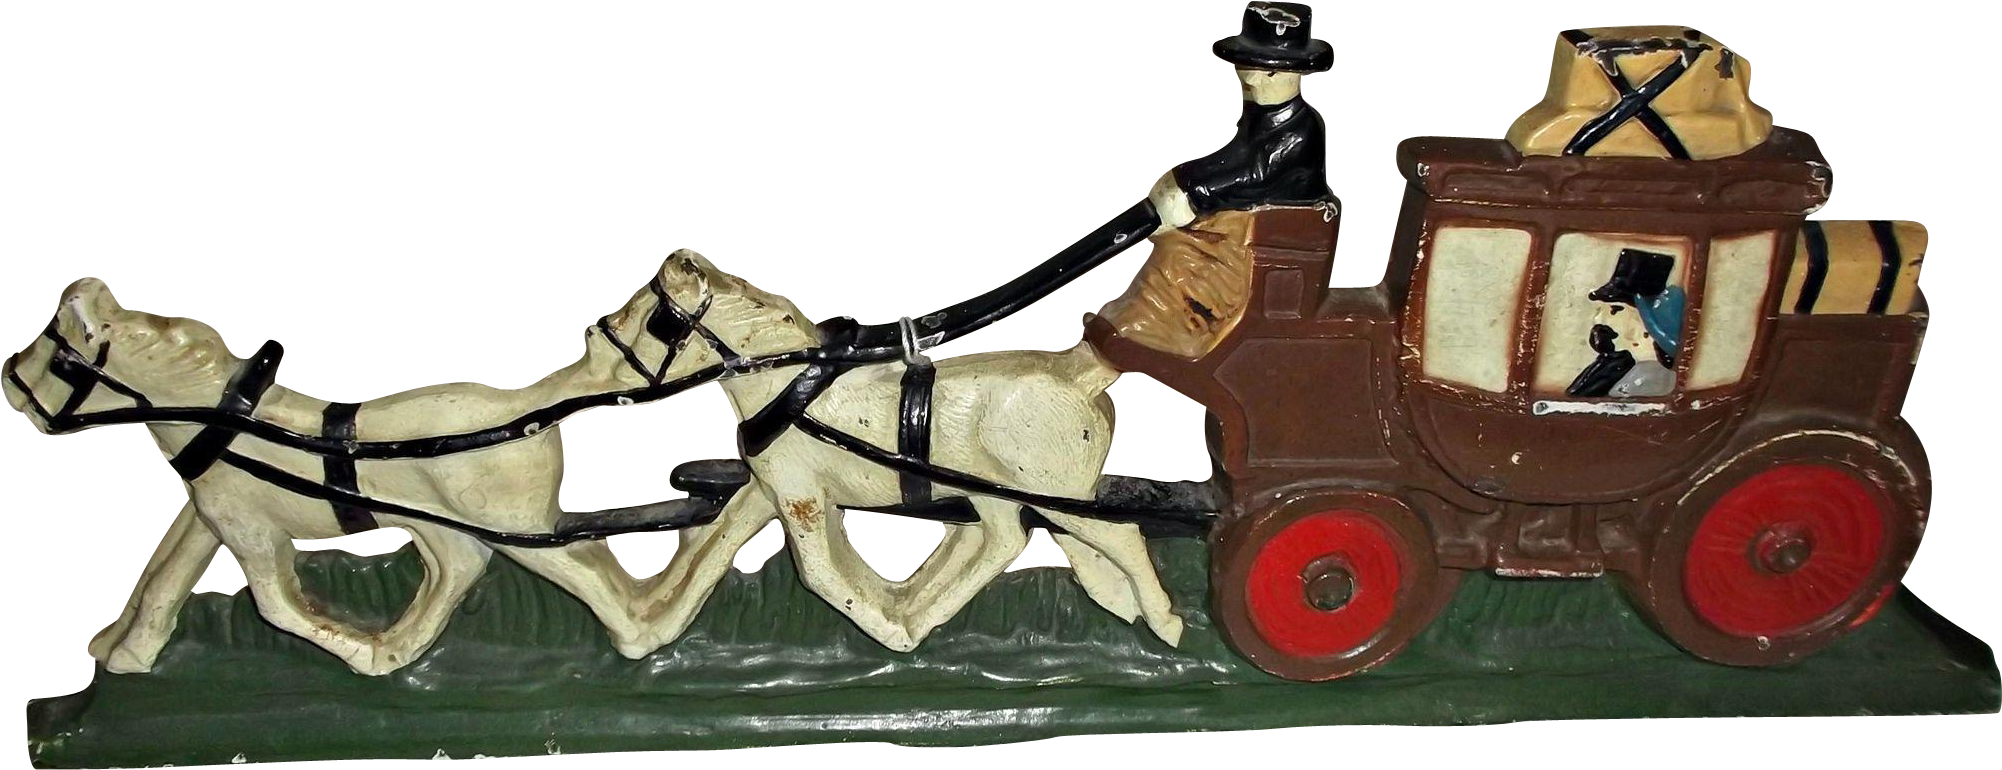 Here Is A Vintage, Painted, Cast-iron, Horse Drawn - Locomotive (2001x2001)